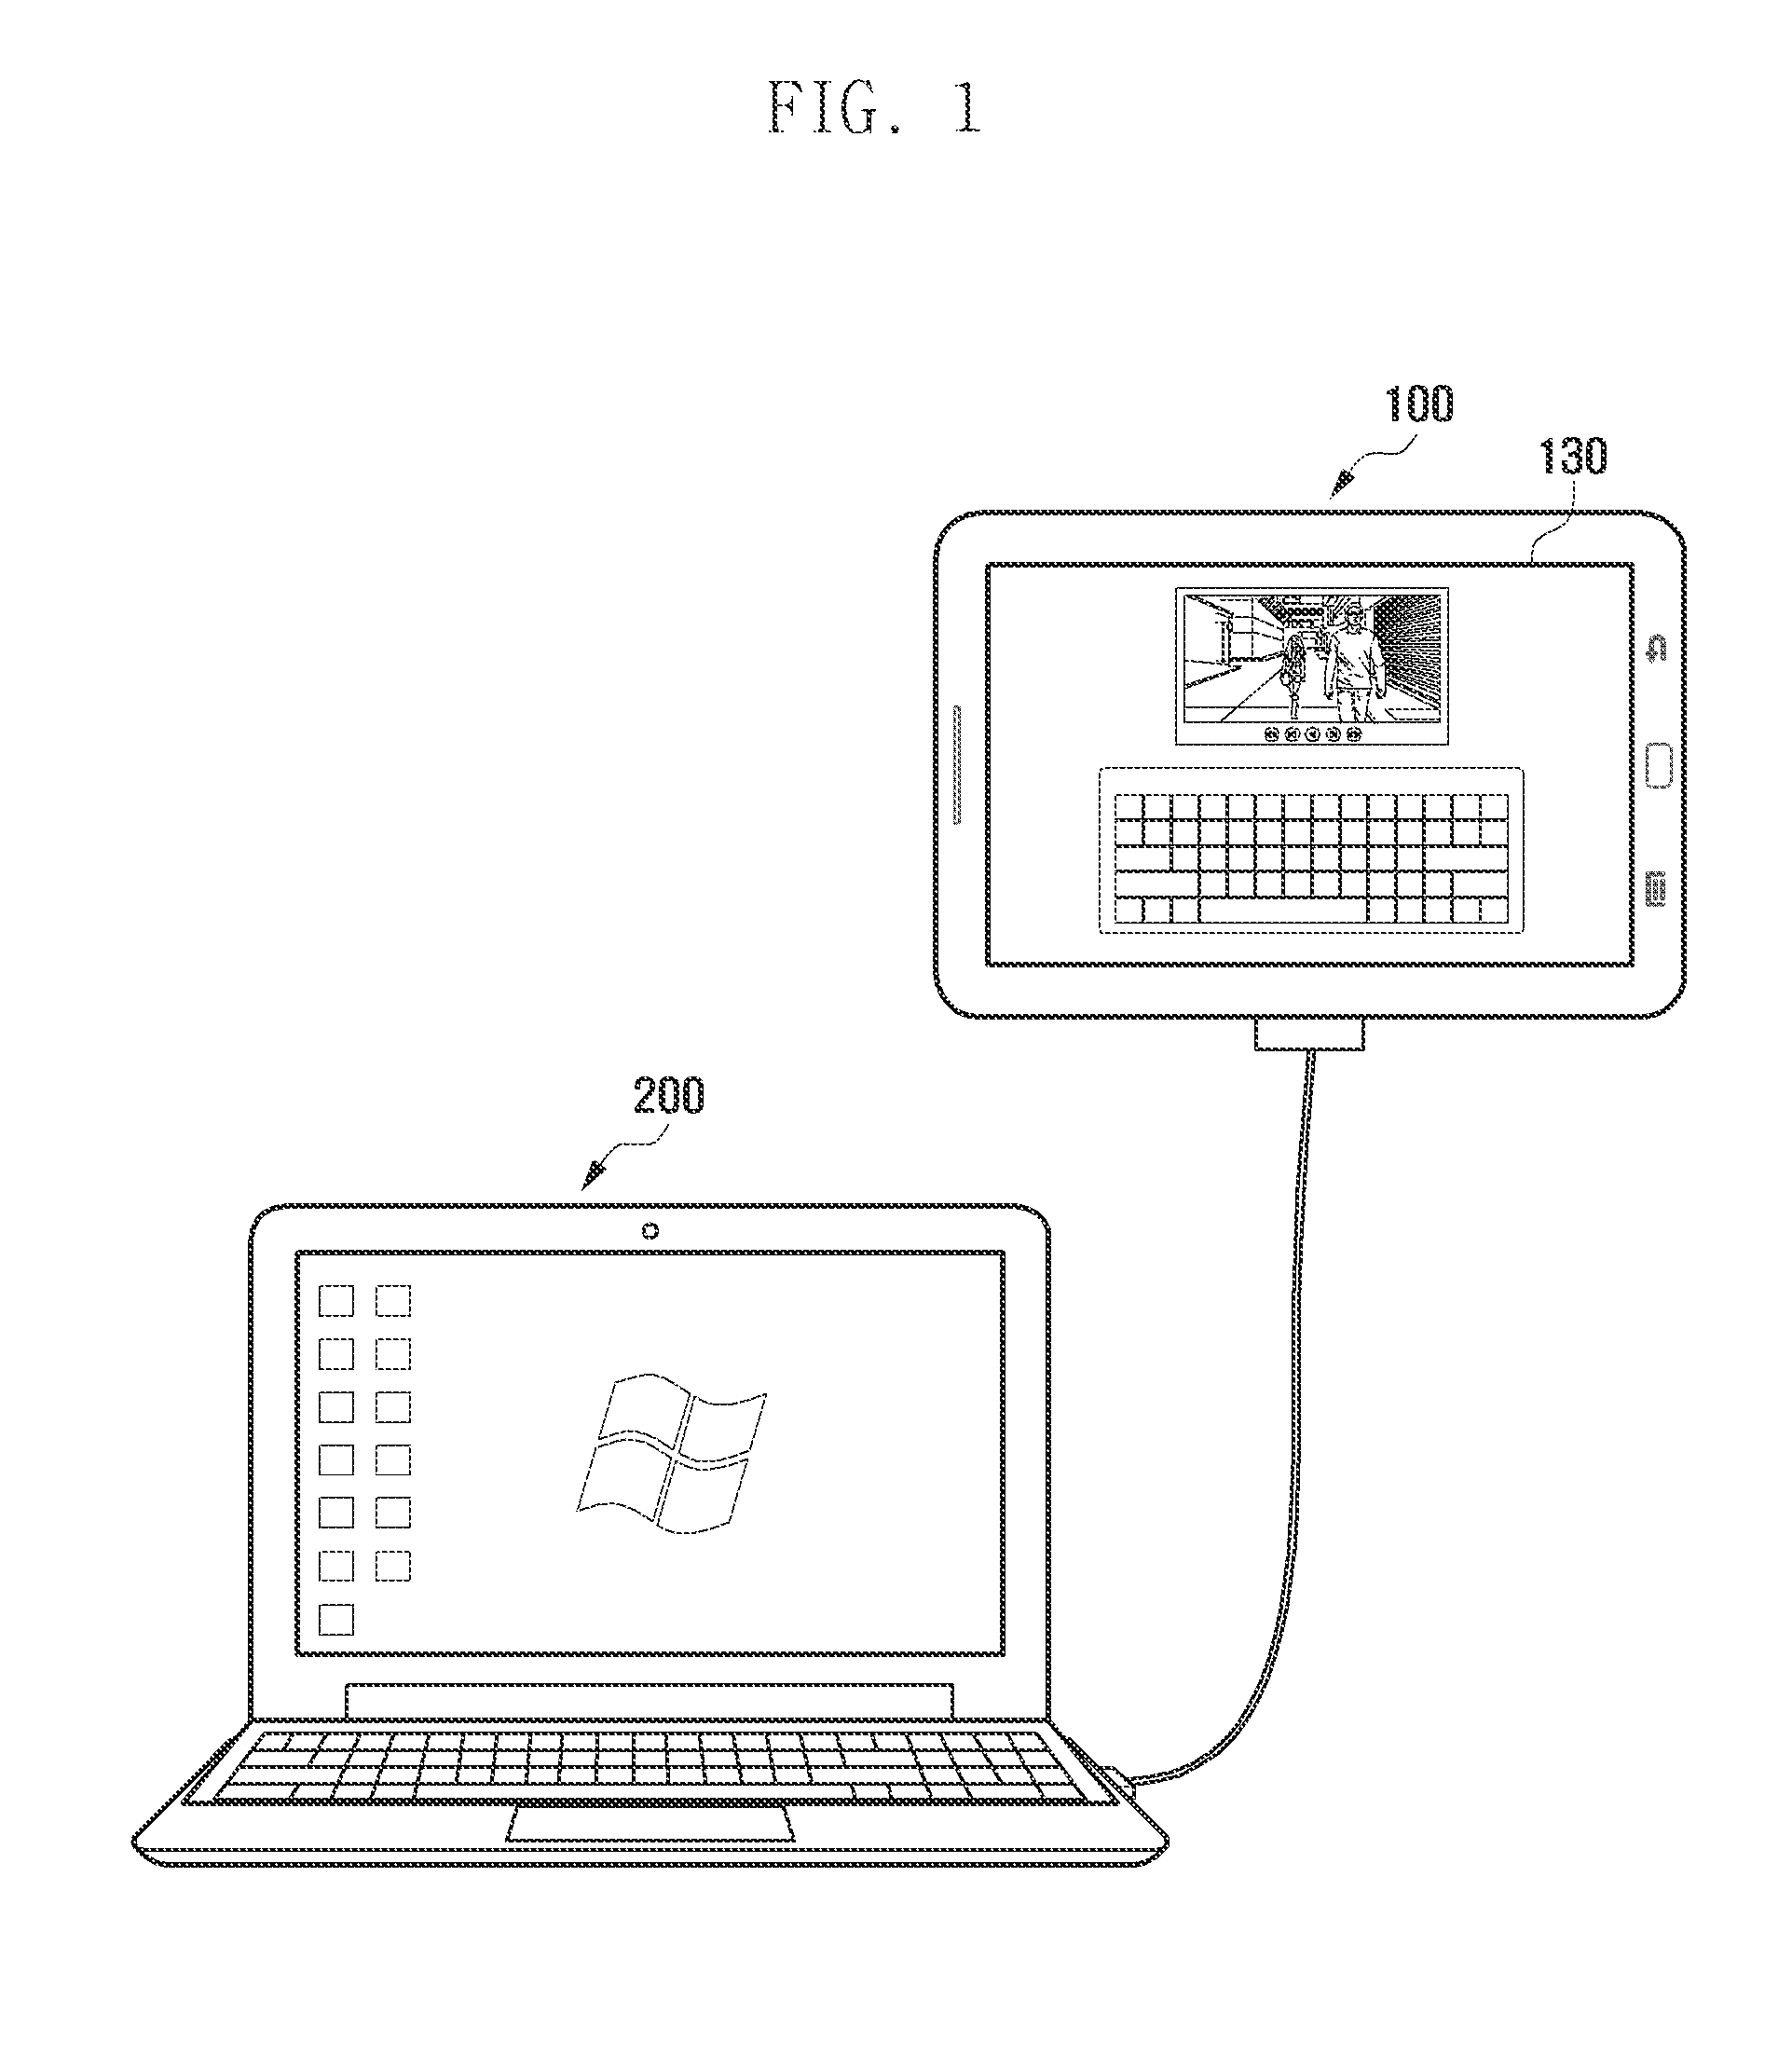 System and method for mutually controlling electronic devices